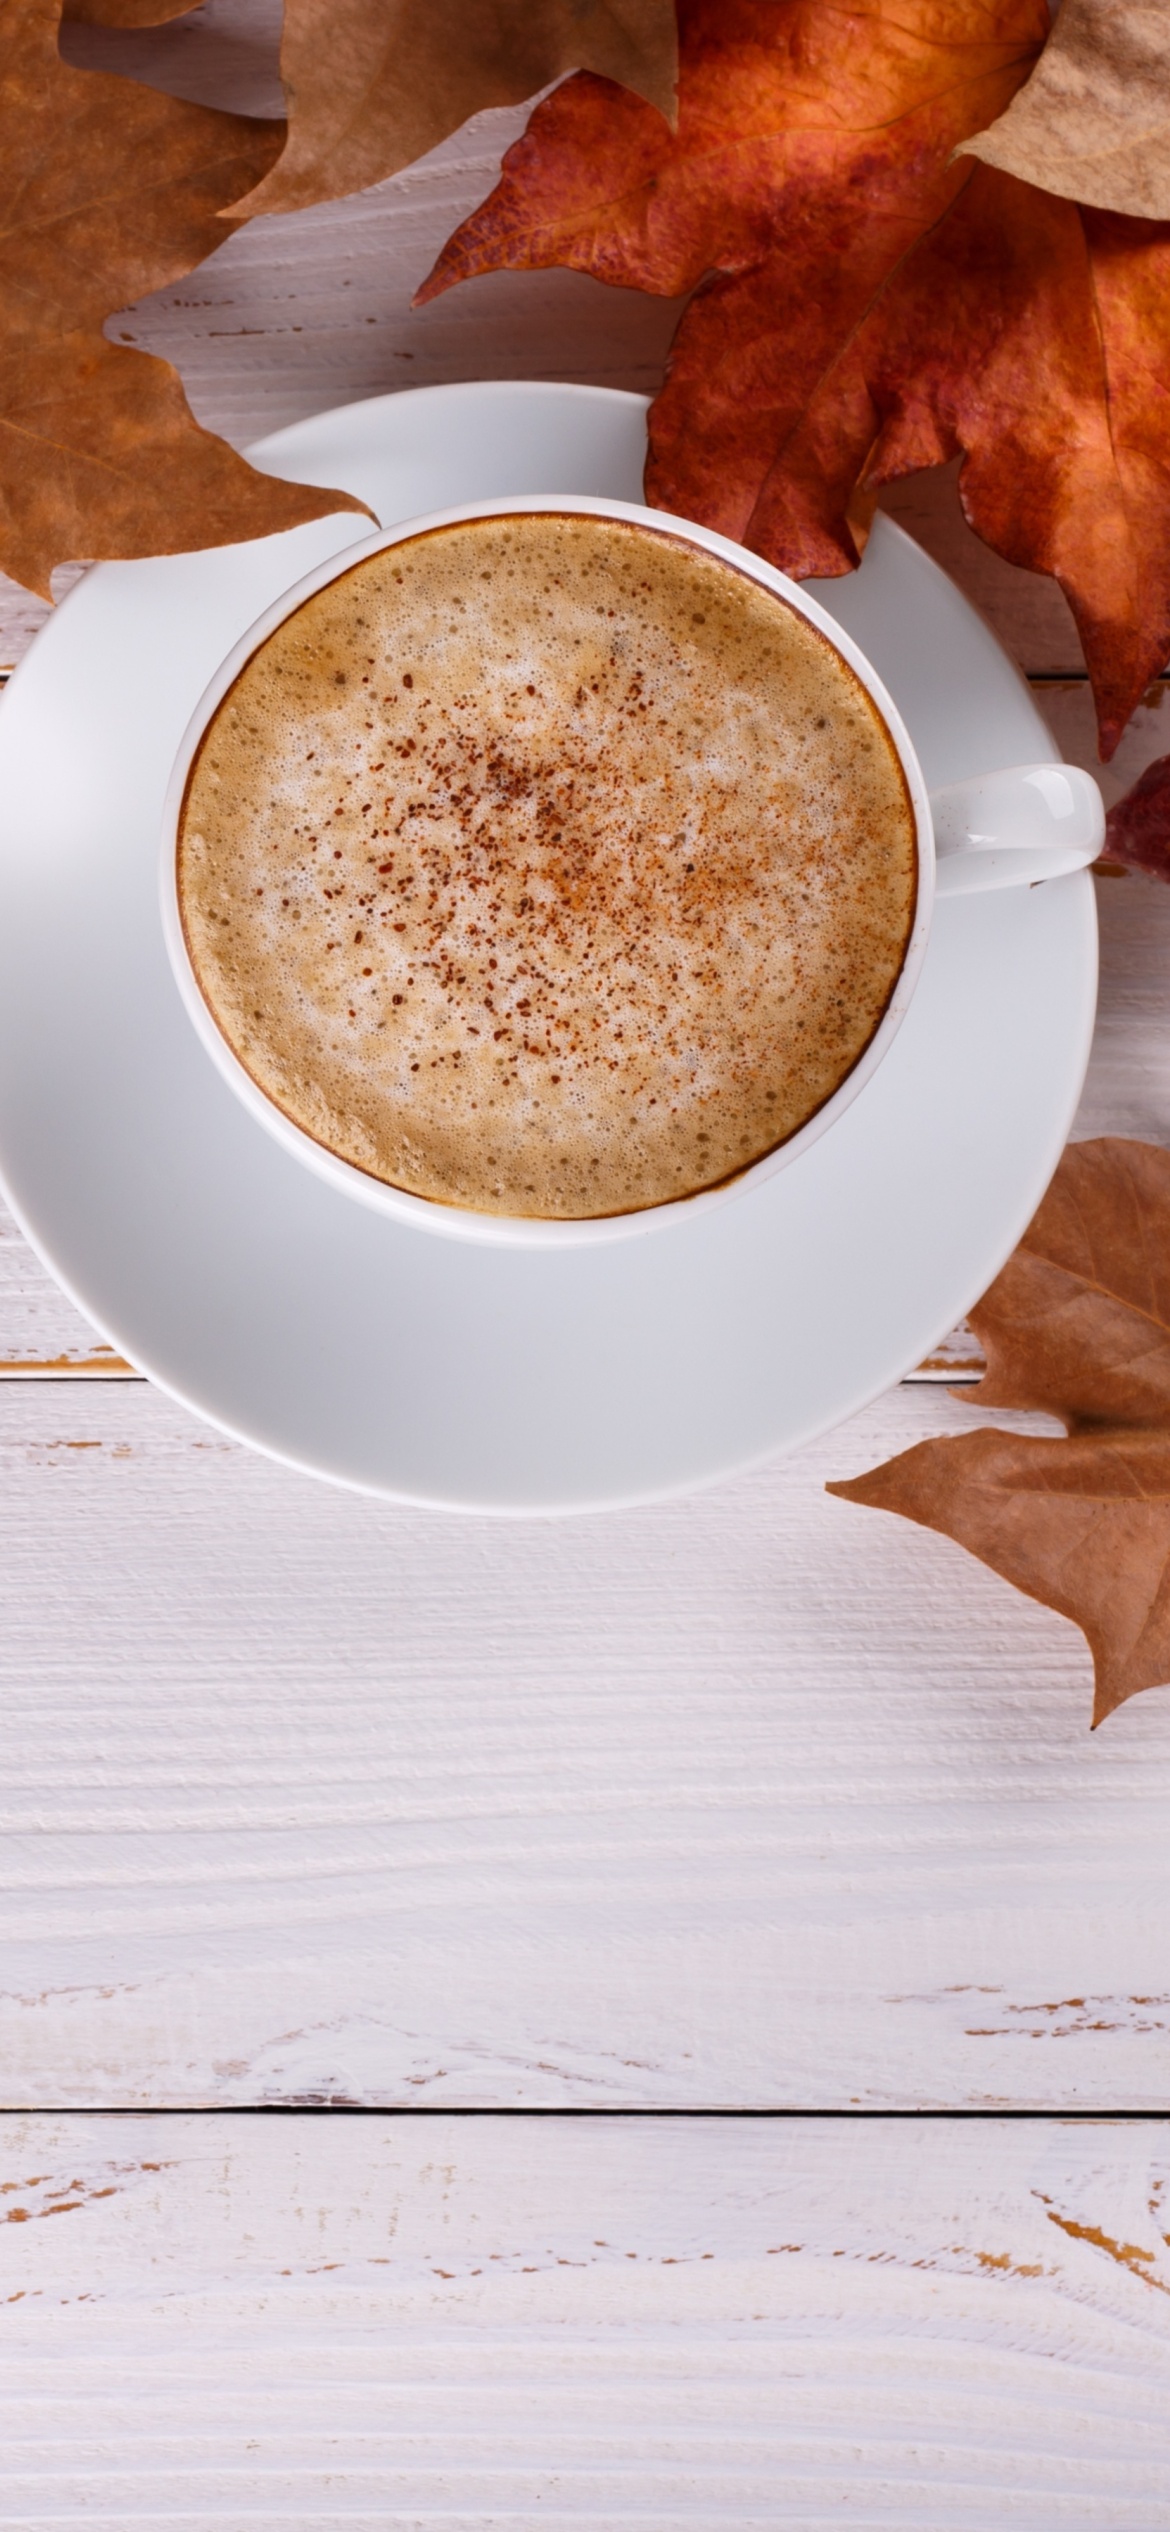 Cozy Autumn Background Coffee Biscuit On Stock Illustration 2216685179   Shutterstock